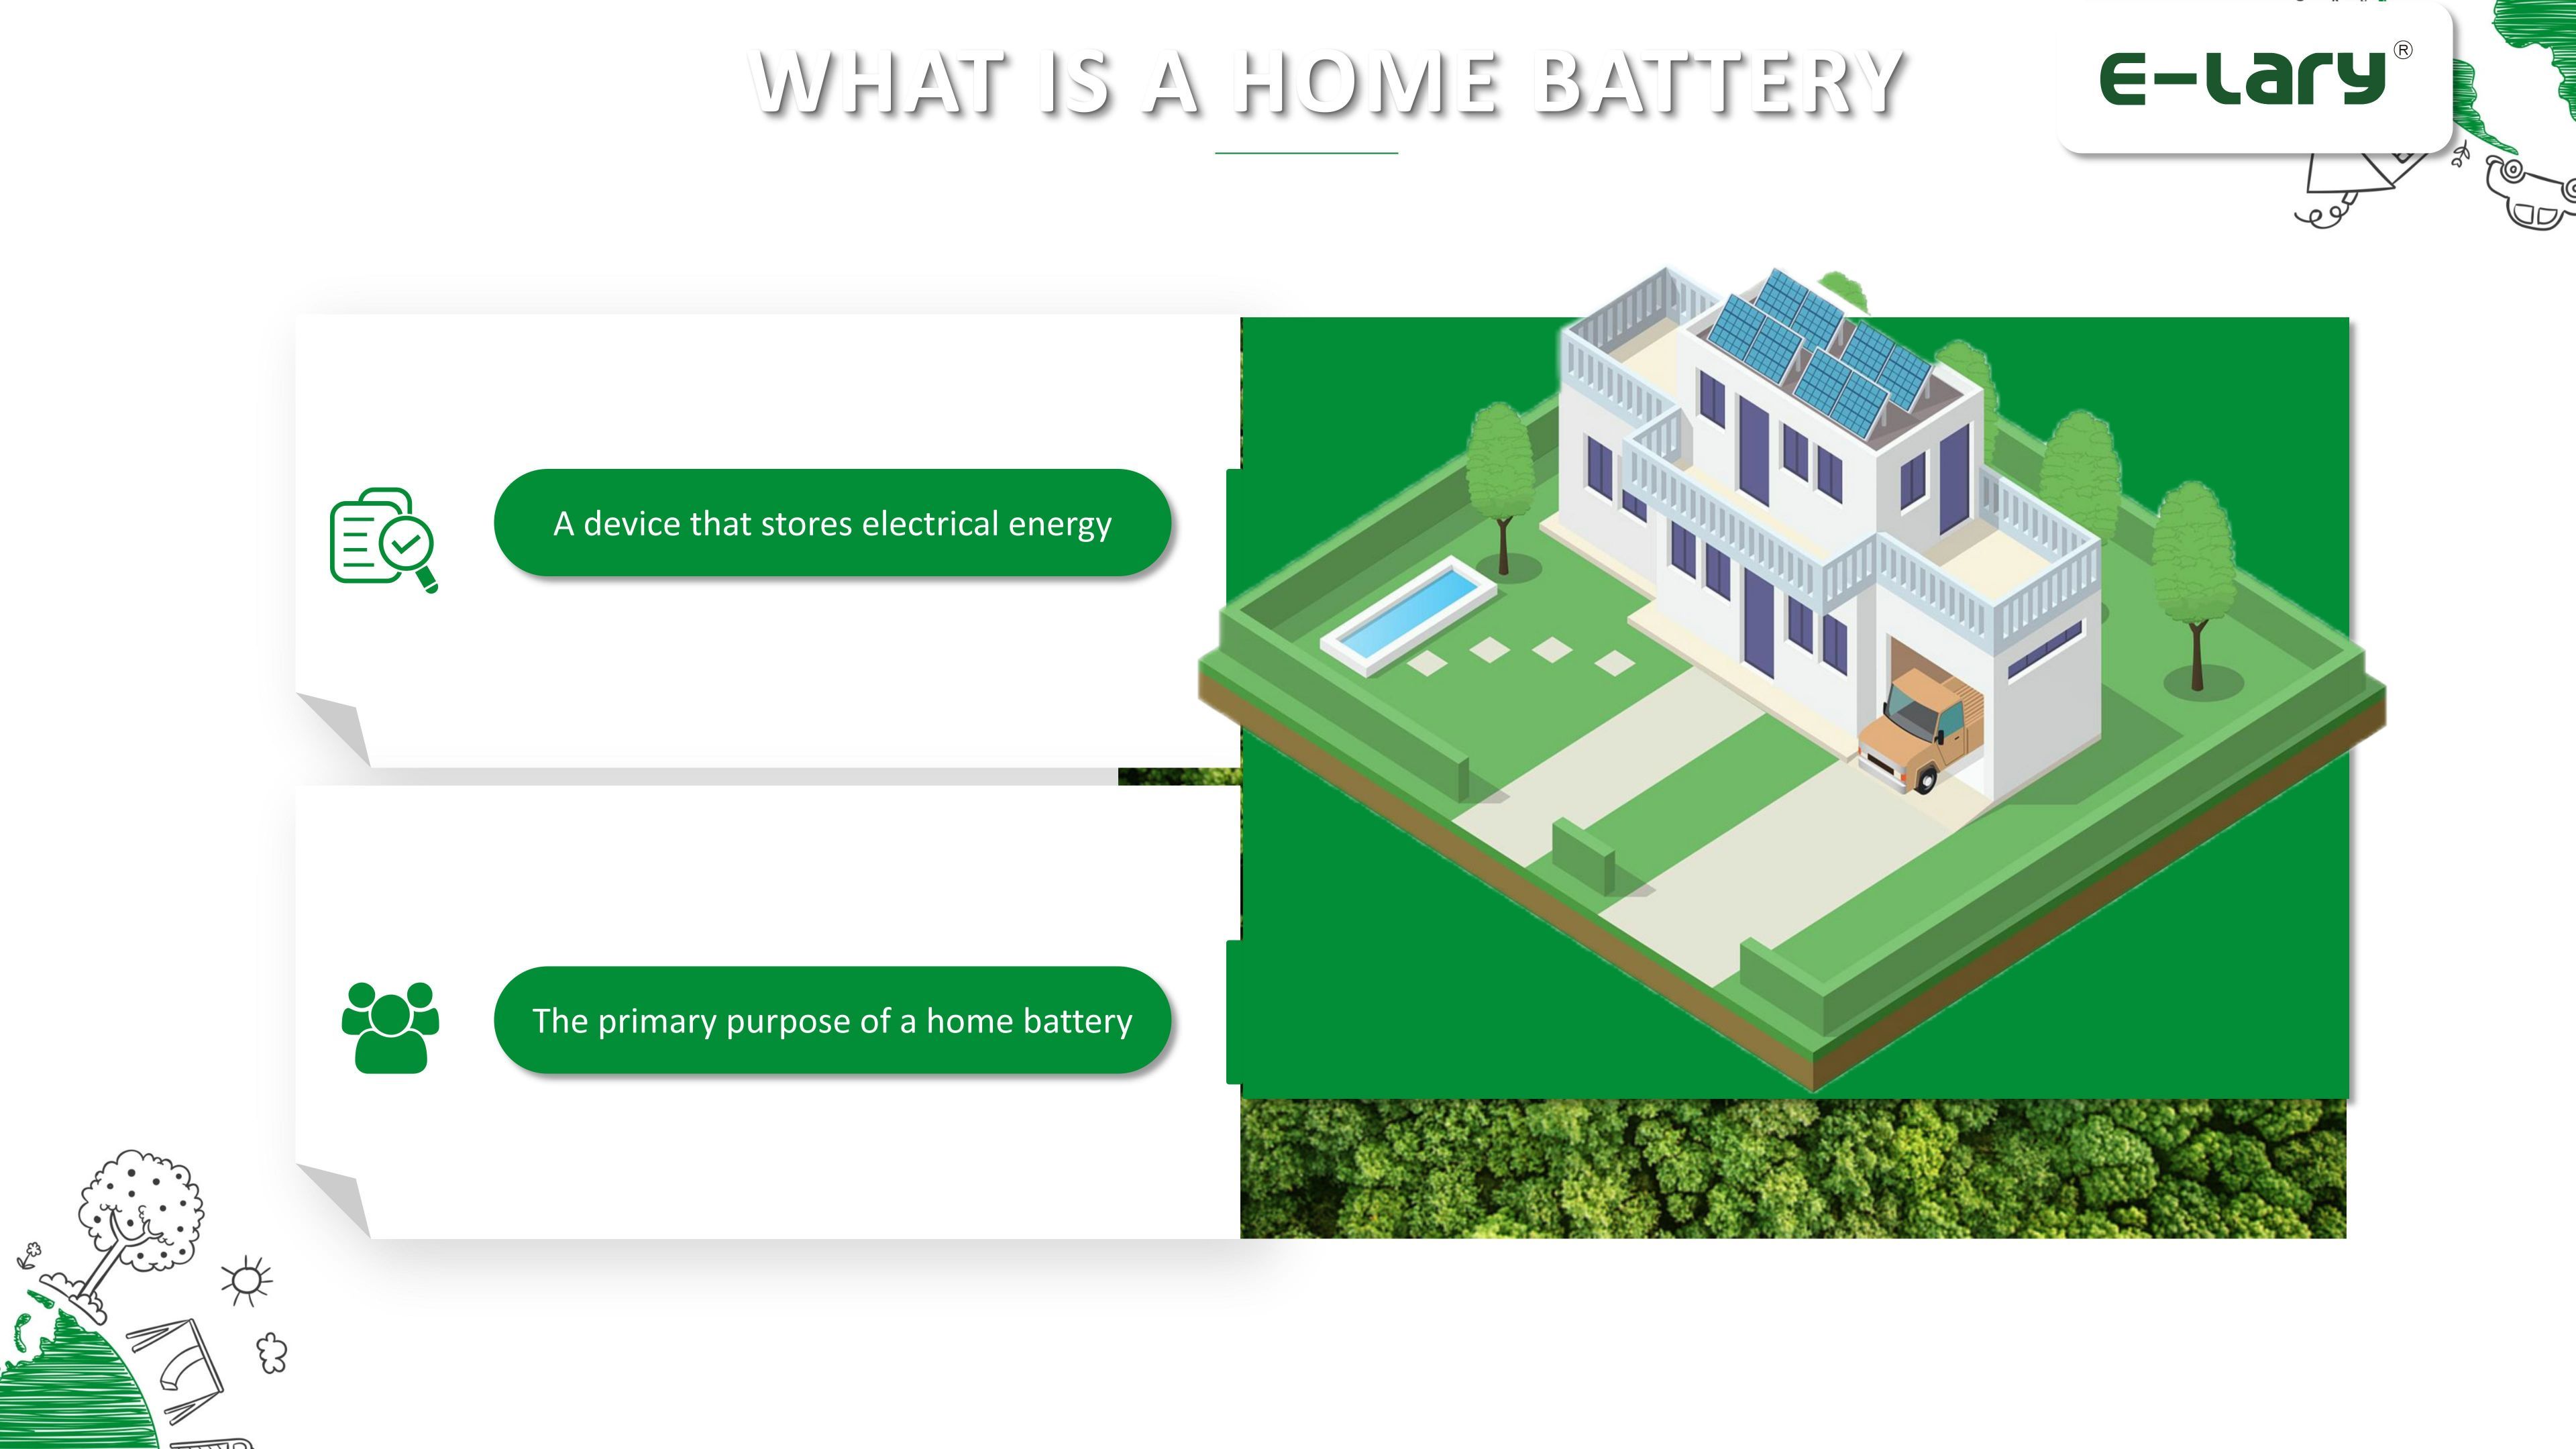 What is a home battery?